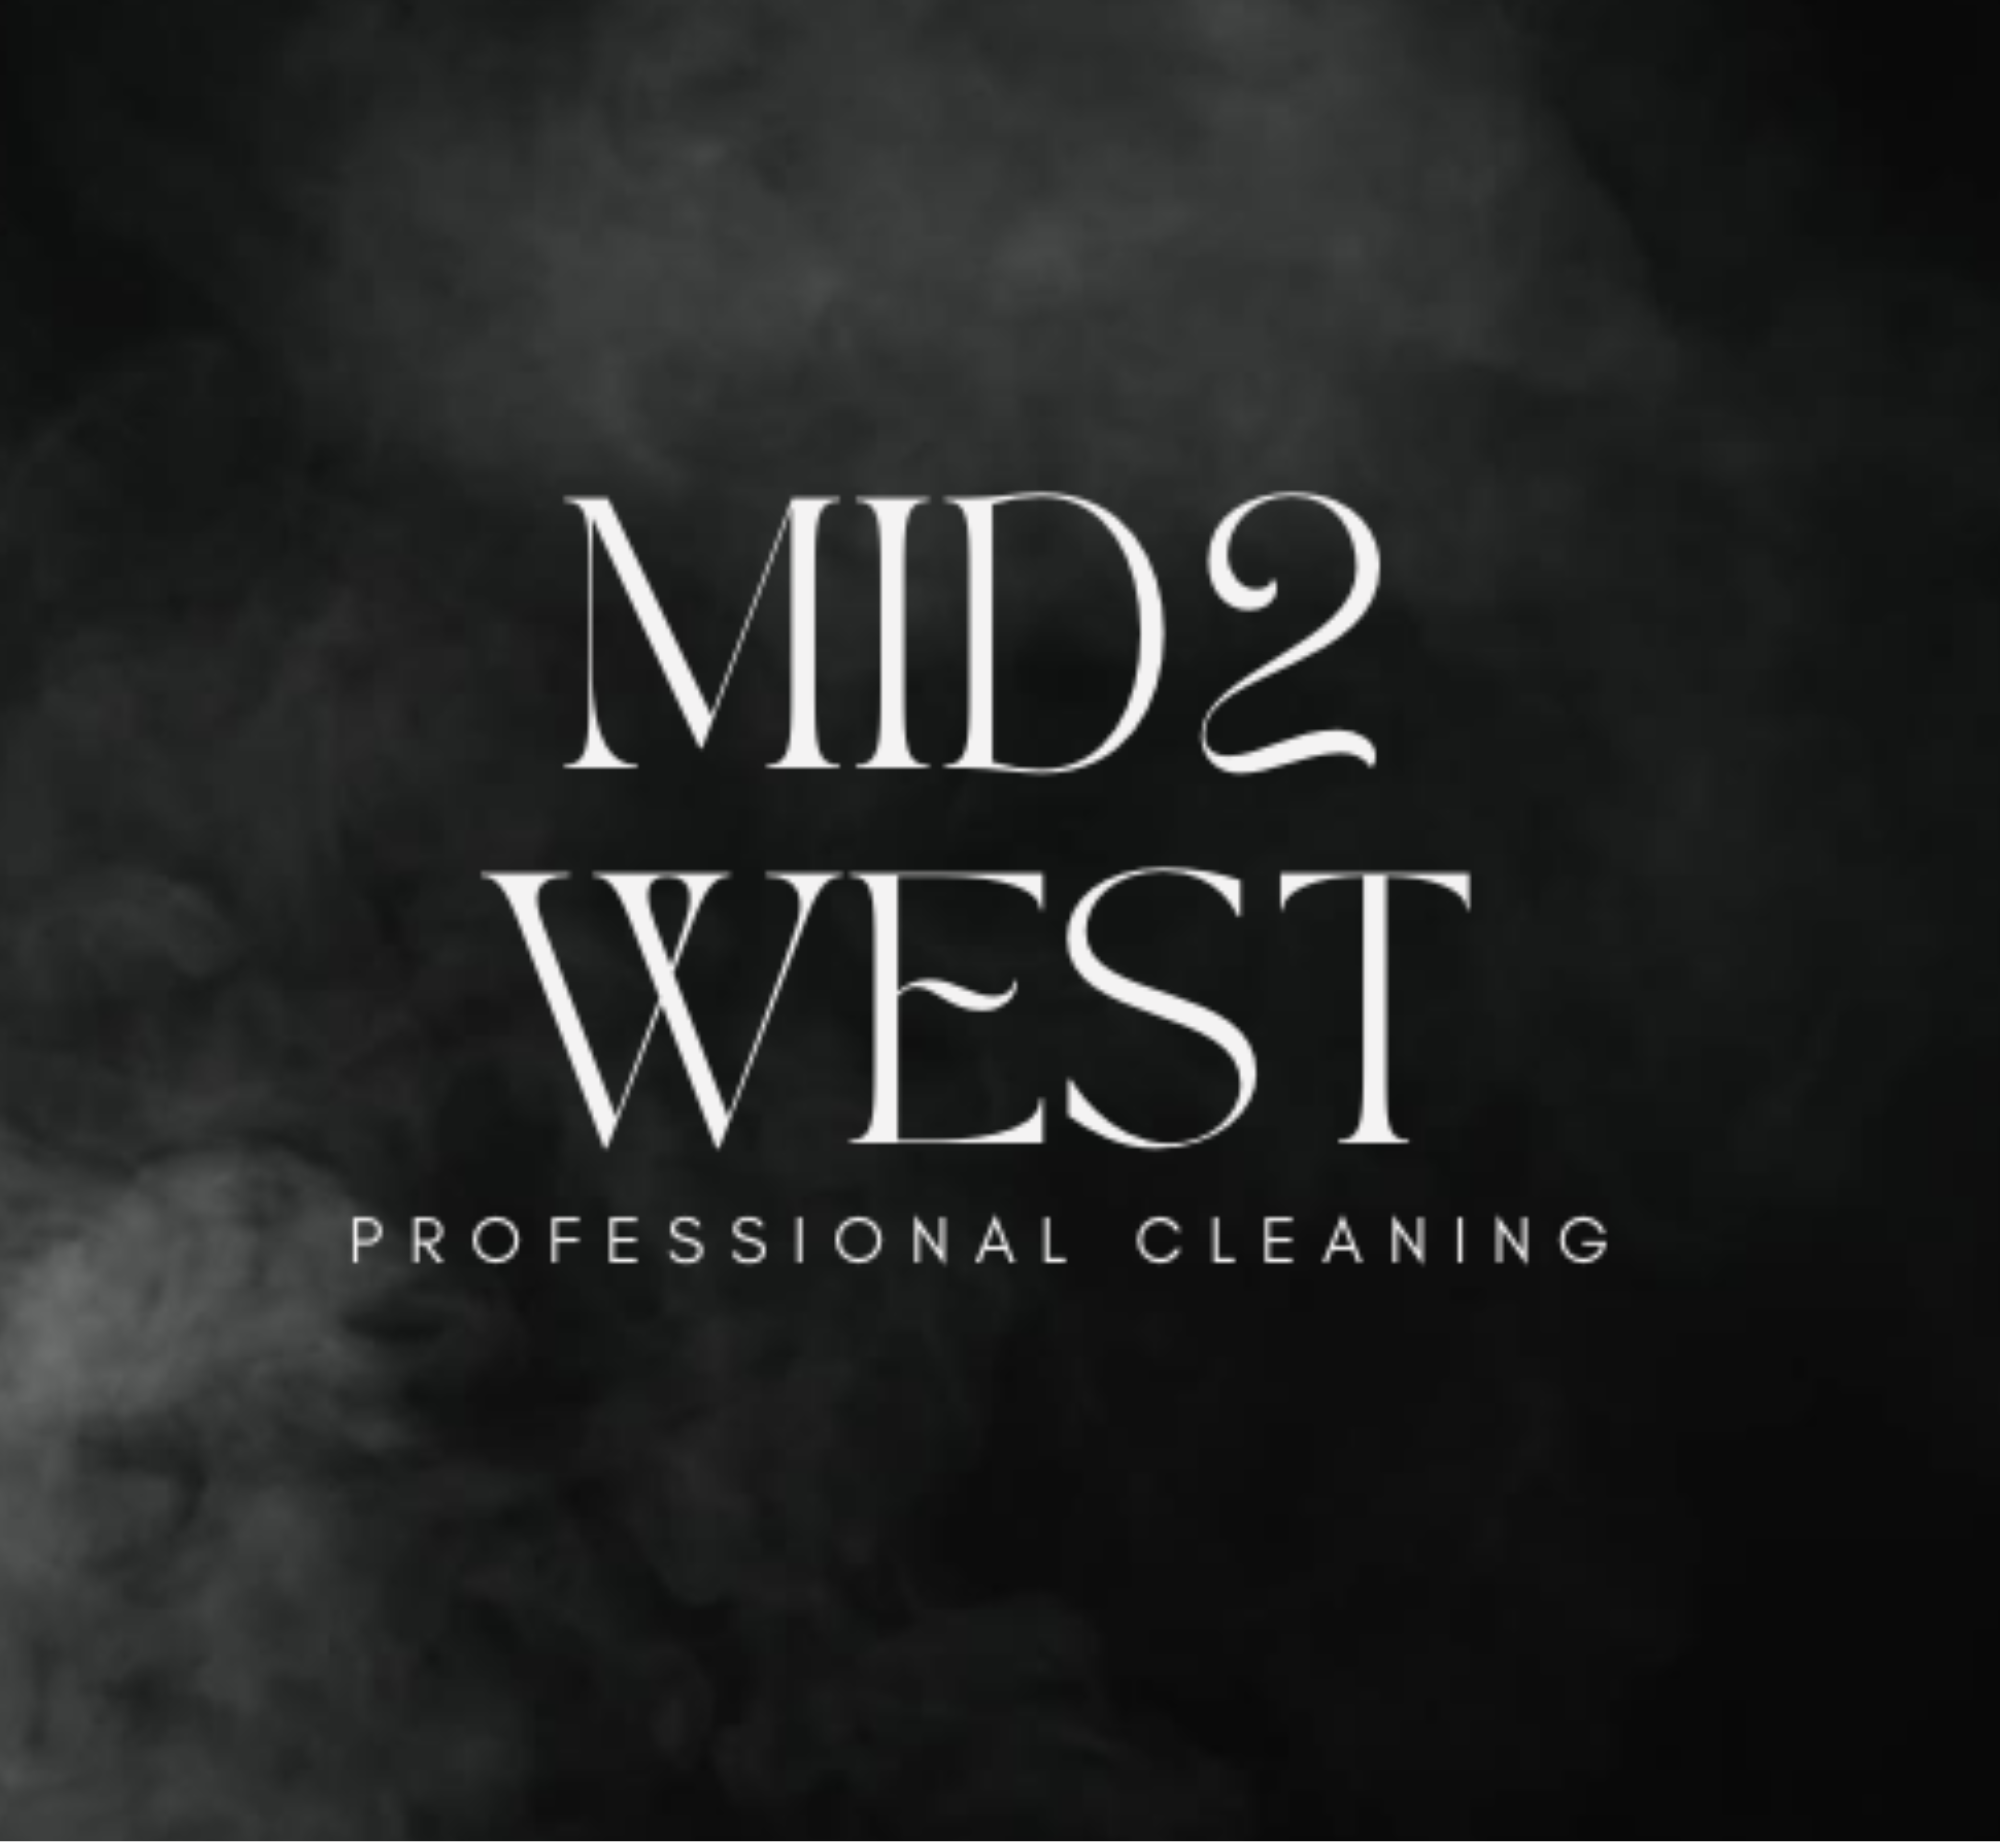 Mid2West Professional Cleaning Logo